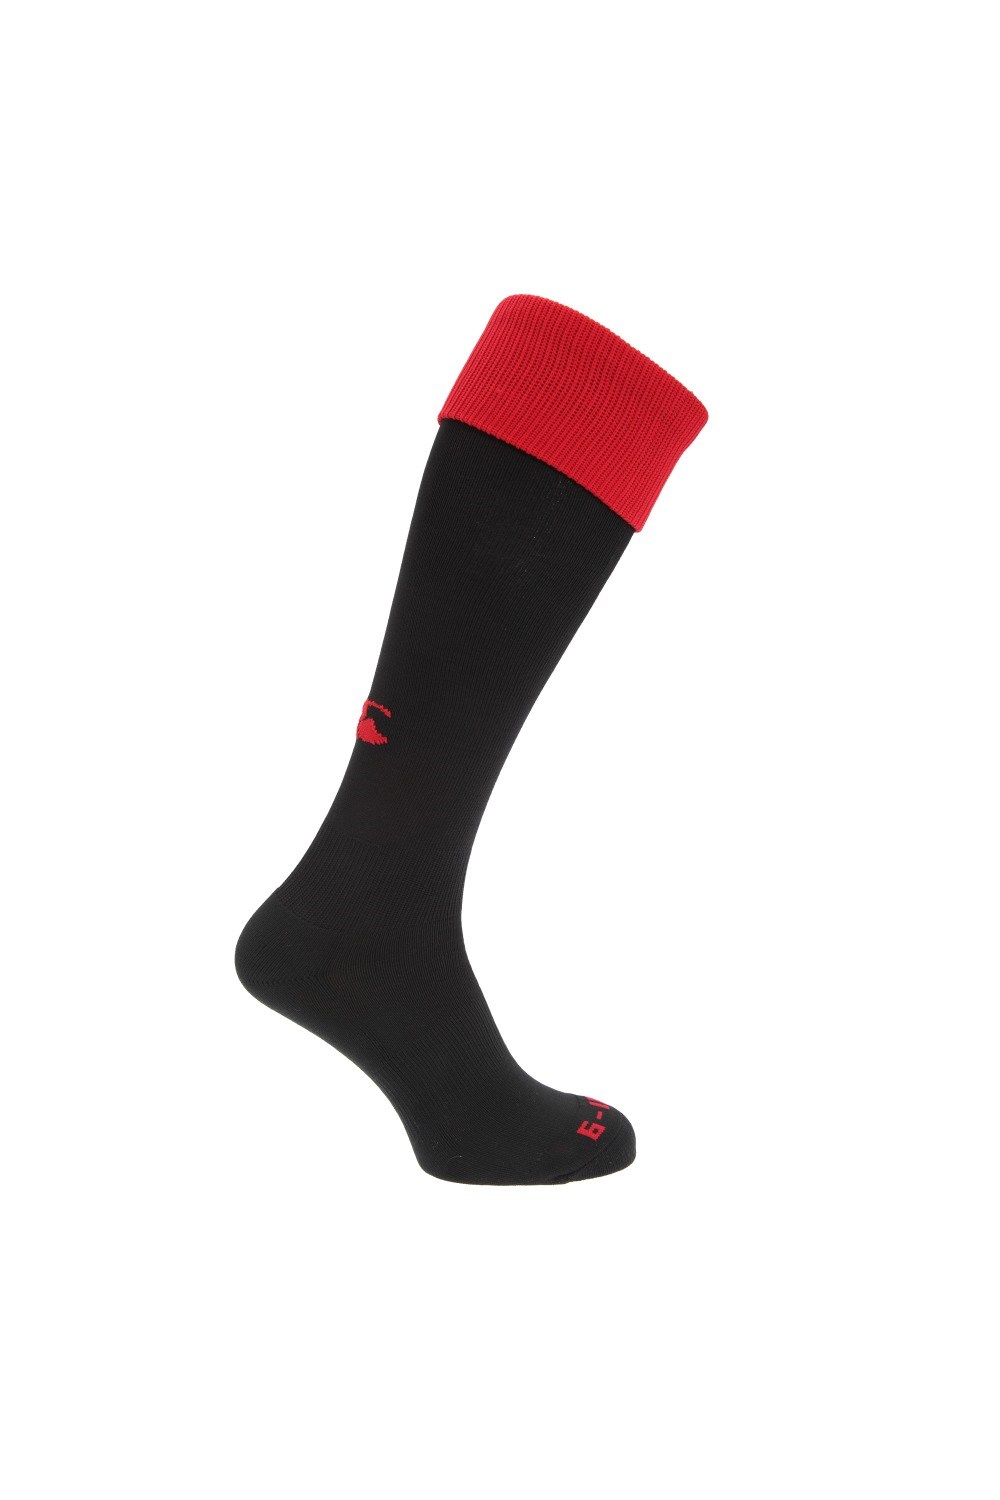 Playing Cap Mens Rugby Socks -